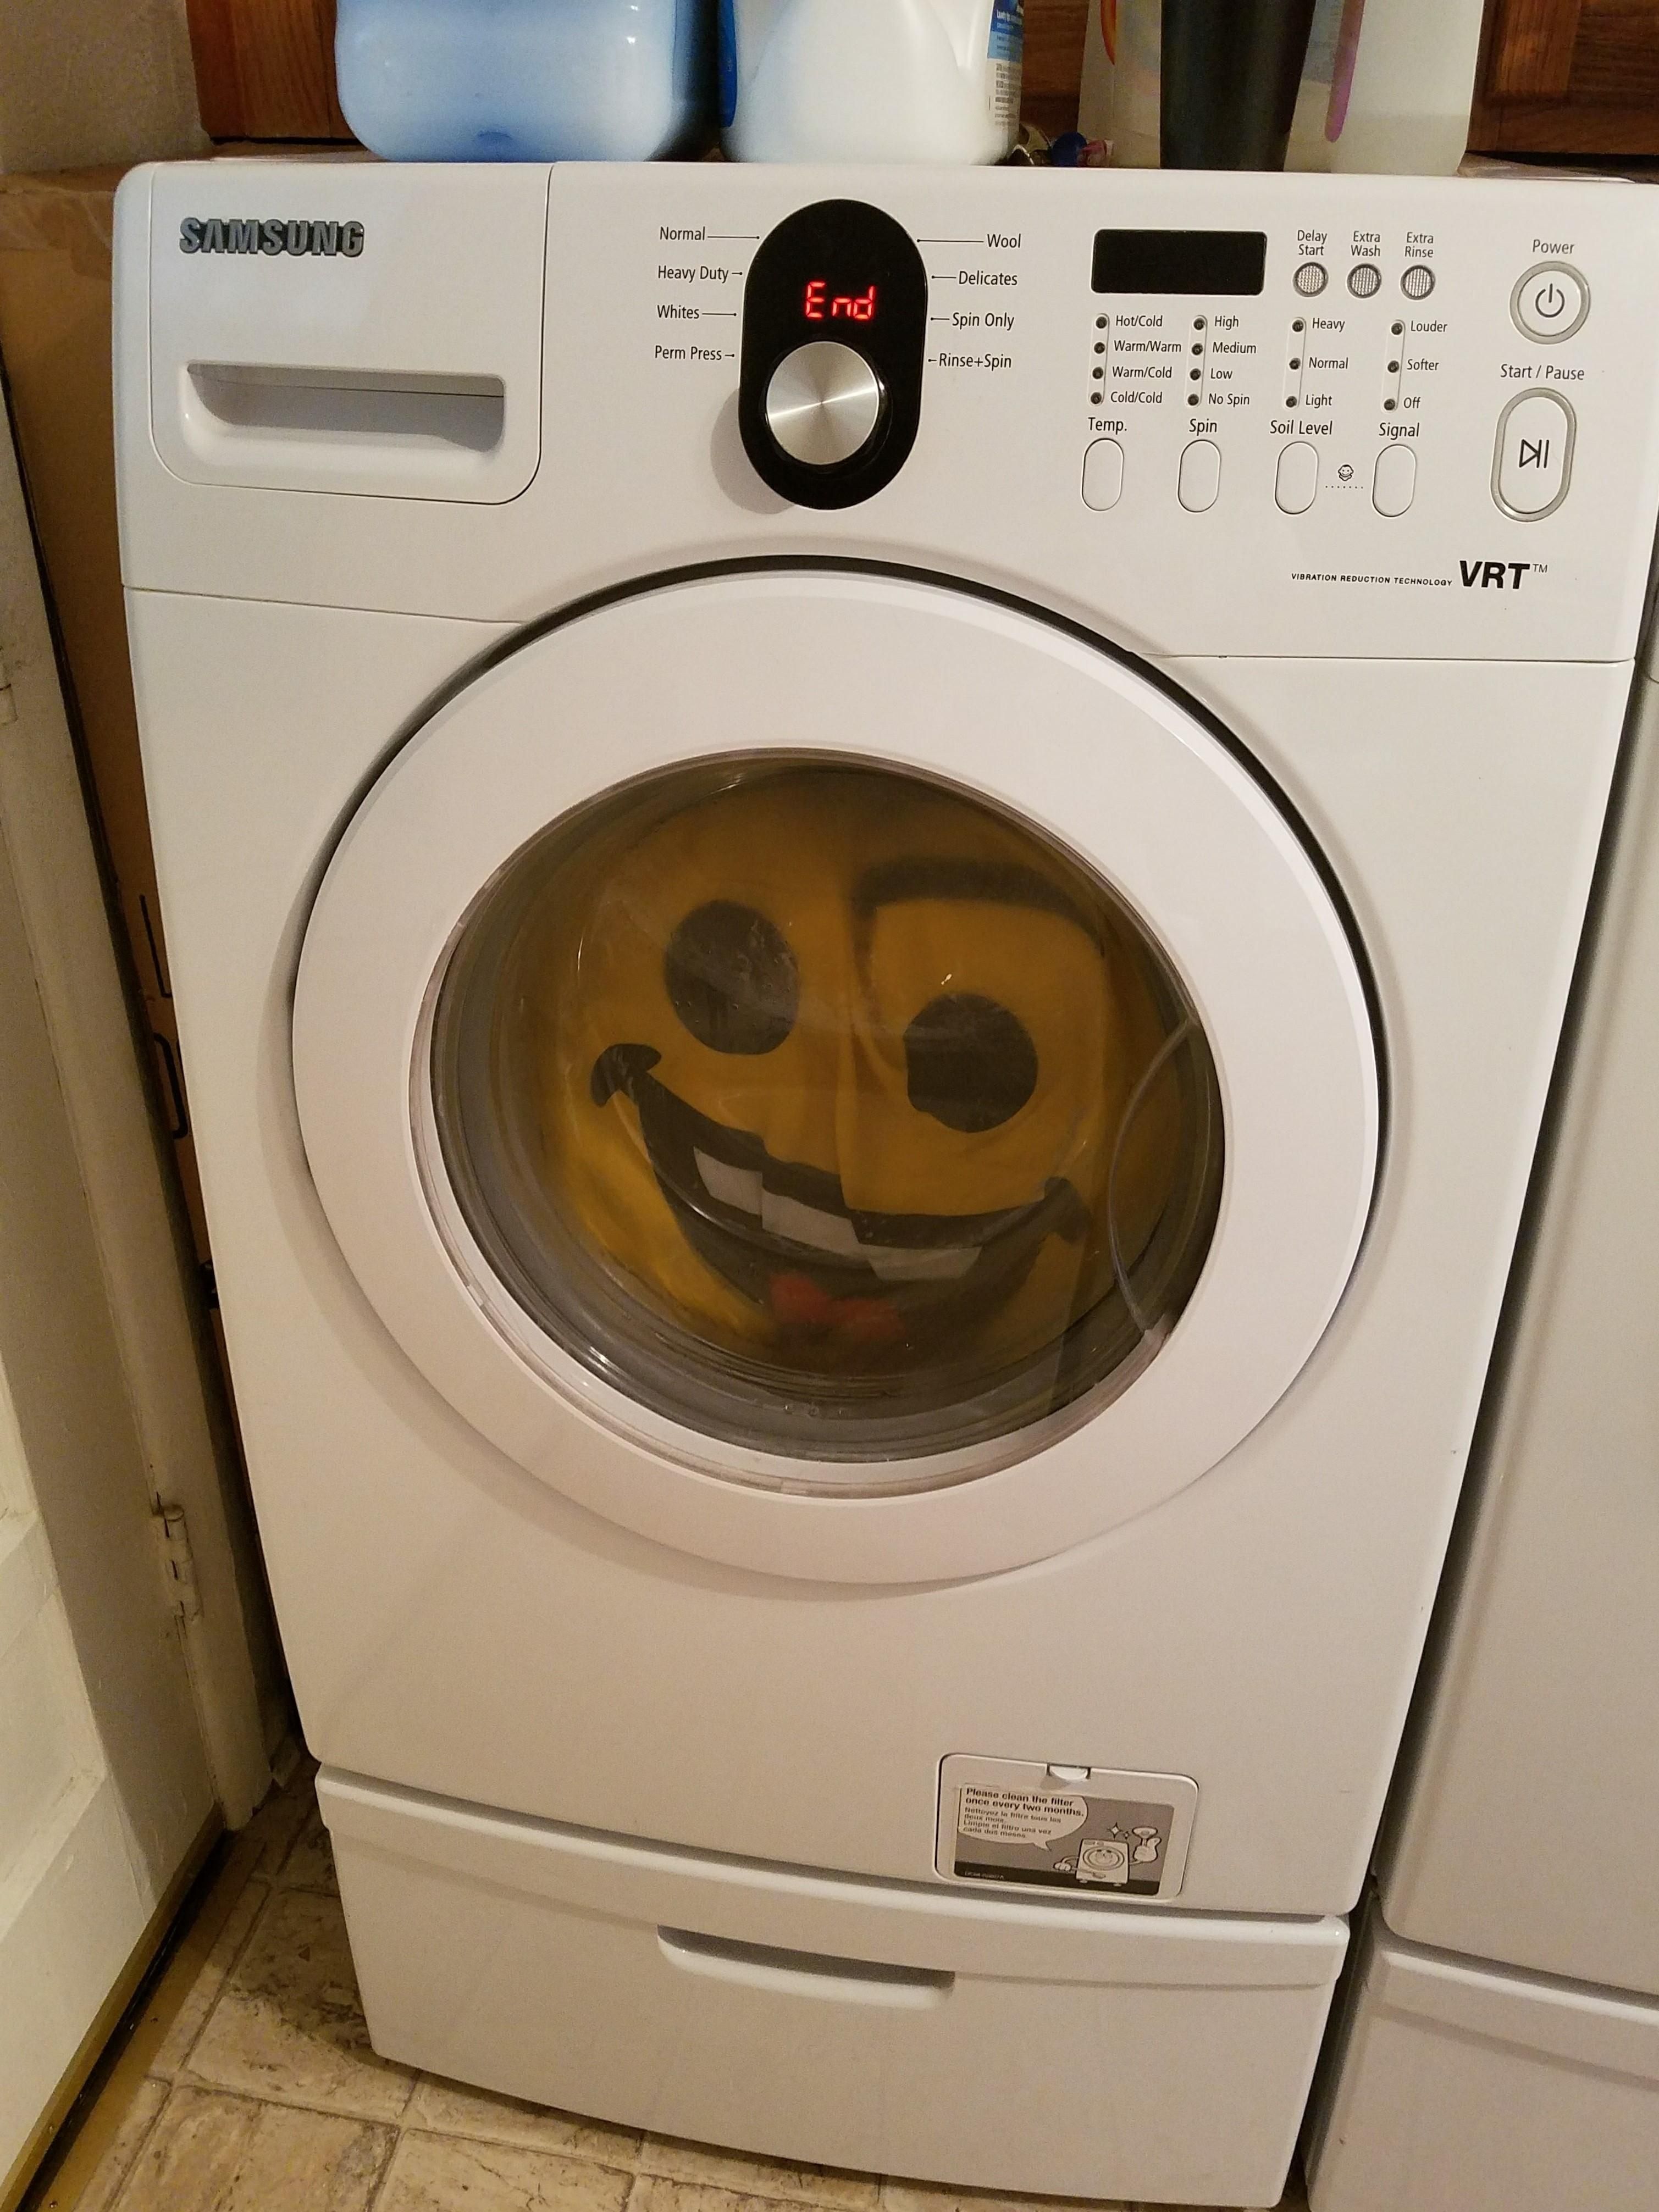 My washing machine was very happy to see me this morning